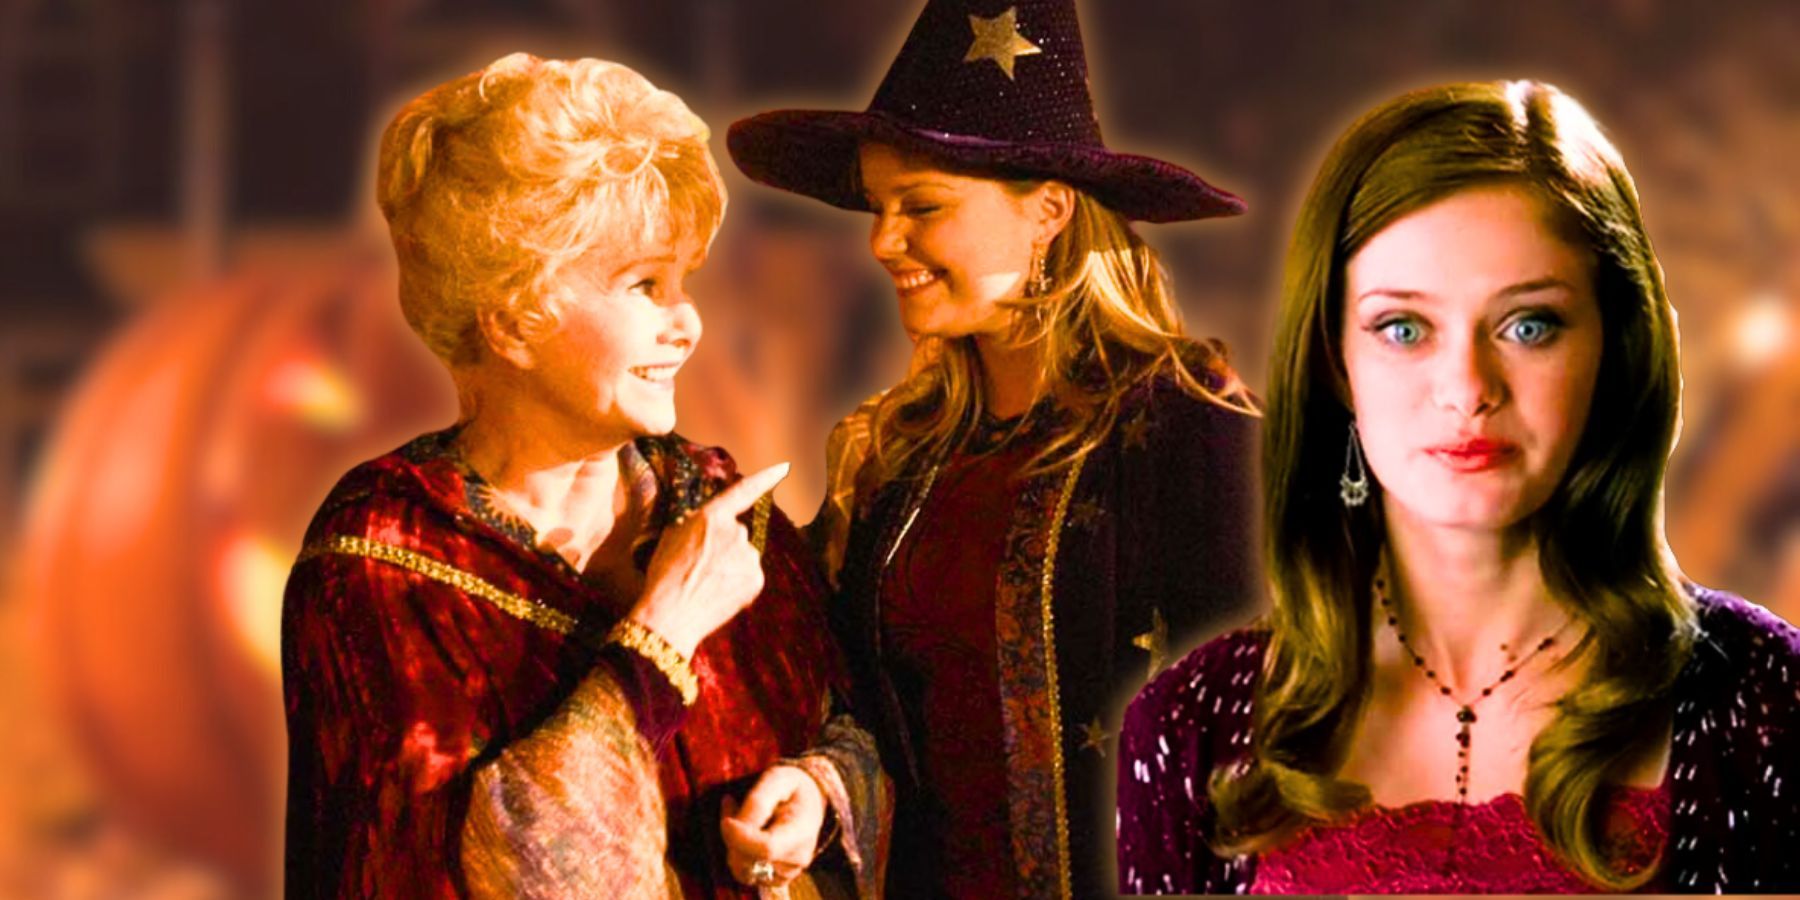 Kimberly J Brown with Debbie Reynolds in Halloweentown 2 collage with Sara Paxton from Halloweentown 4